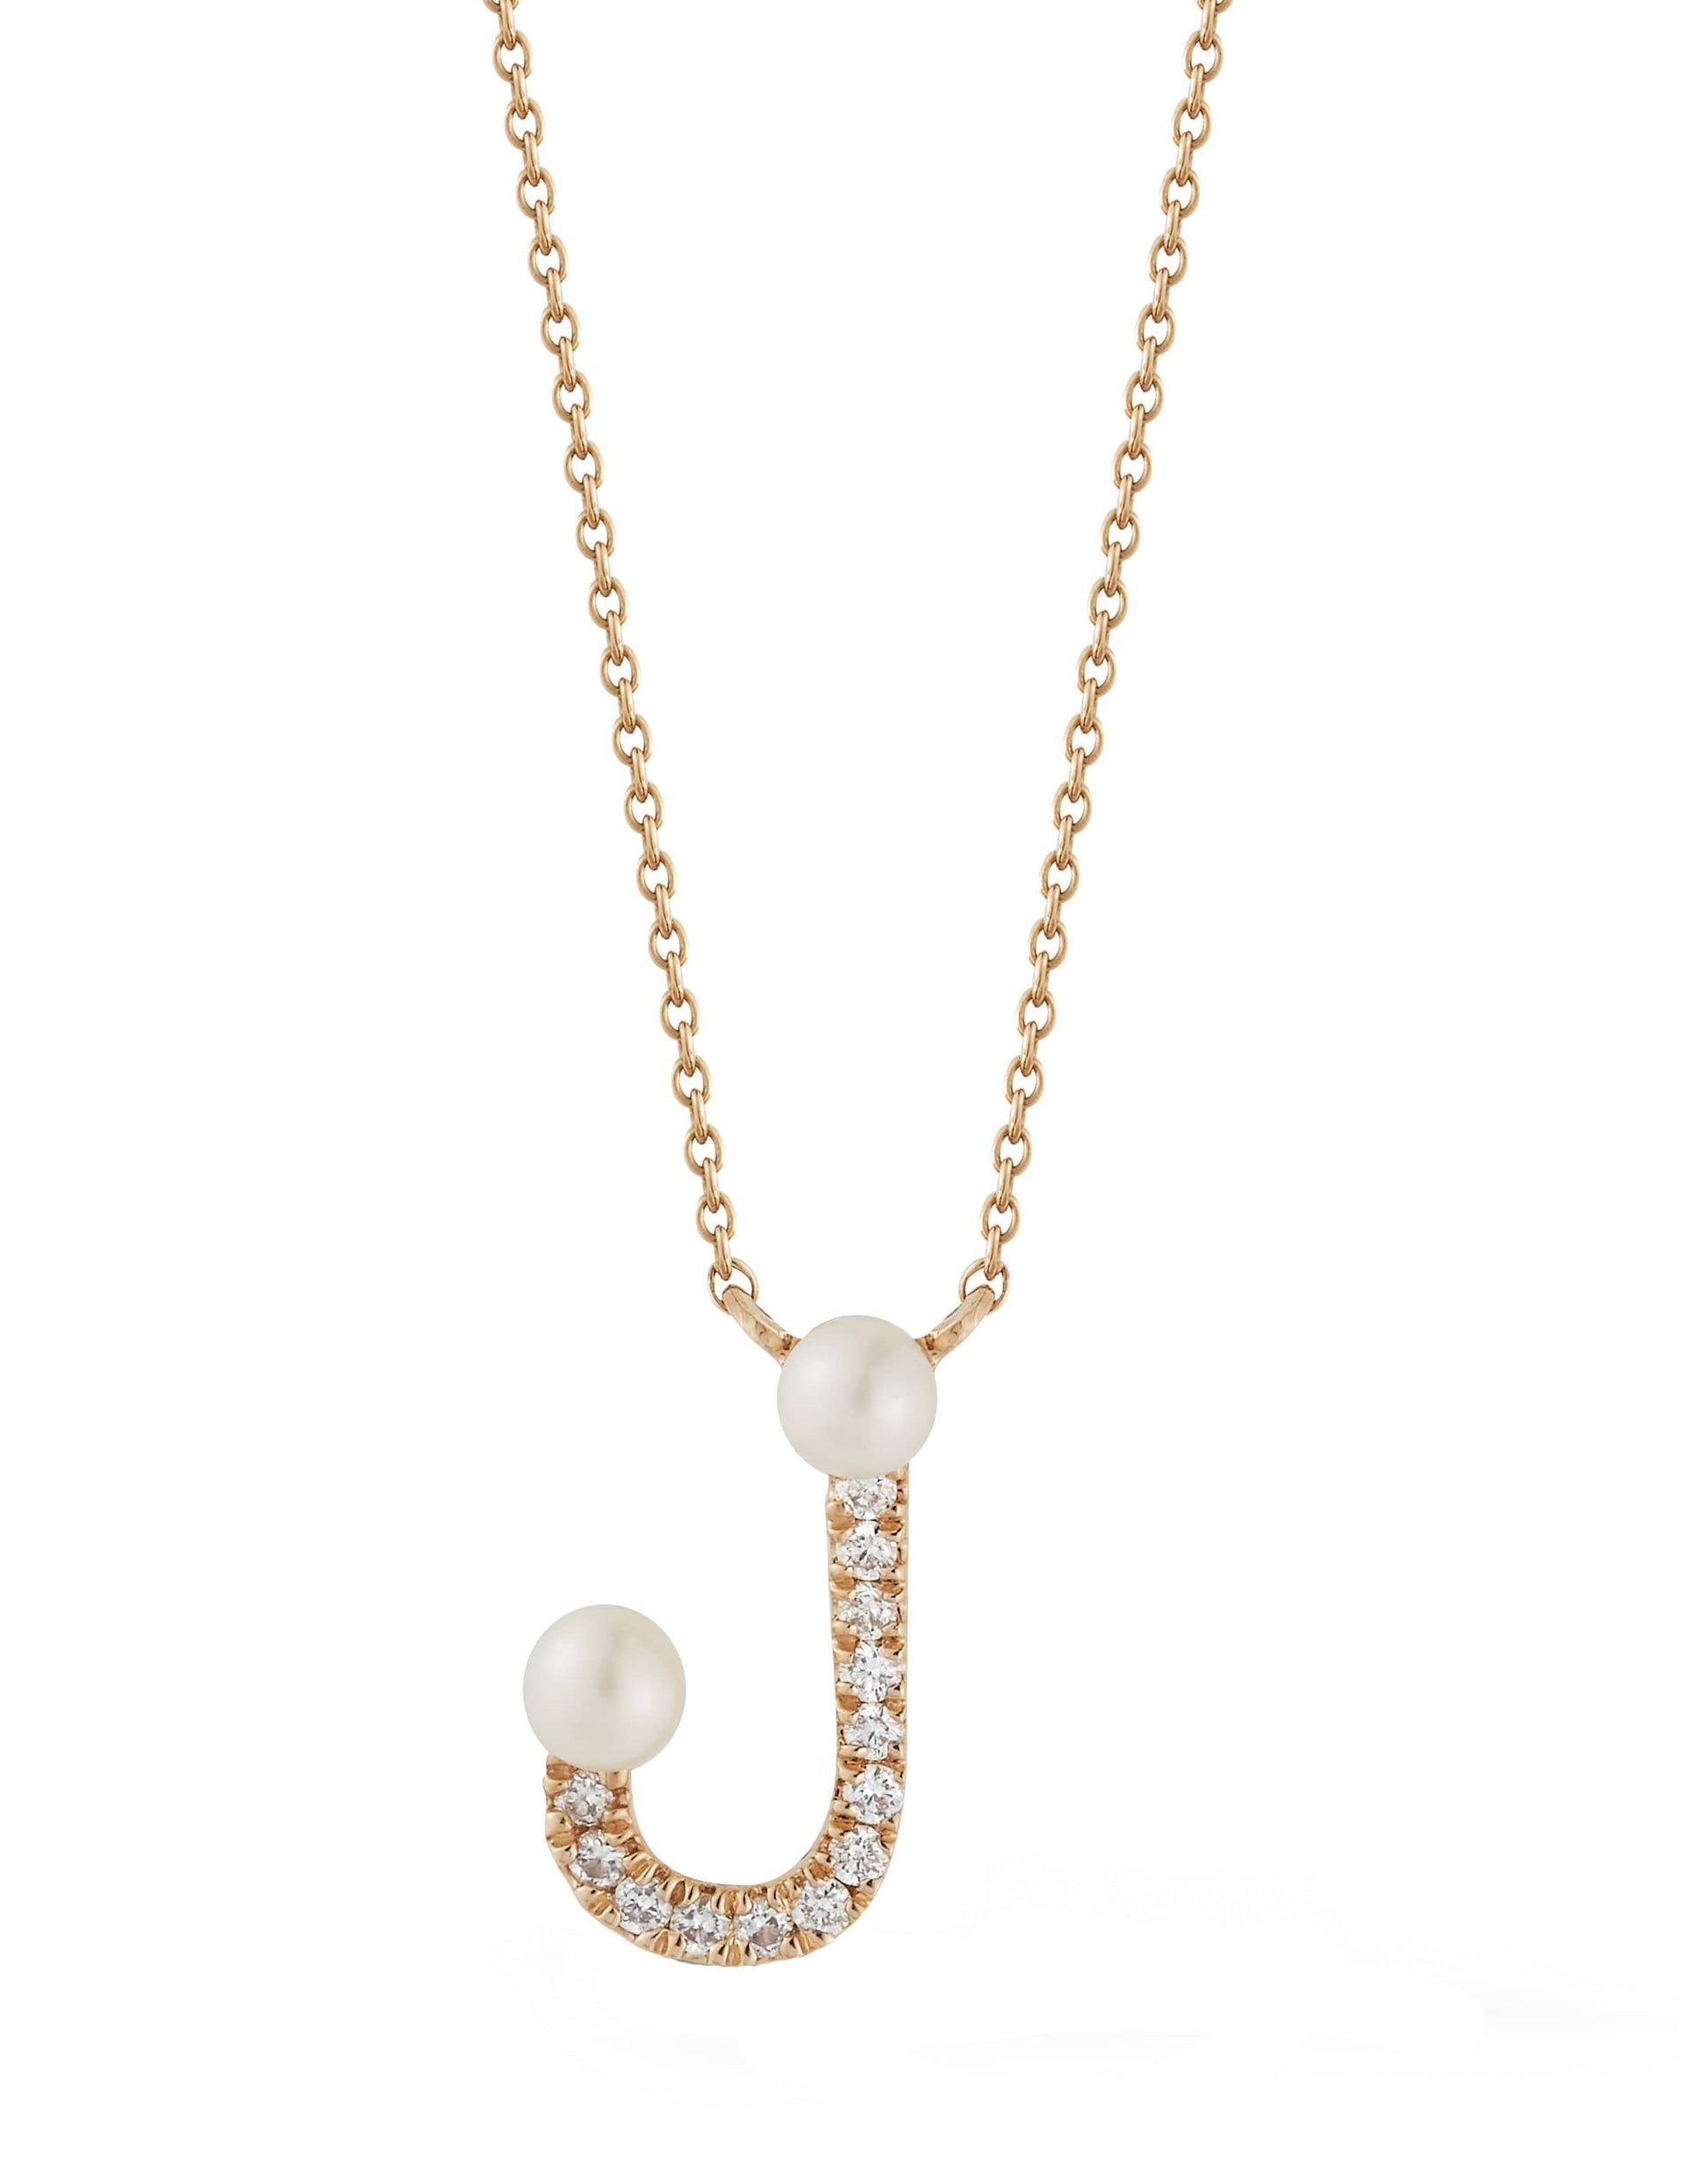 DANA REBECCA DESIGNS-Pearl Ivy Initial J Necklace-YELLOW GOLD